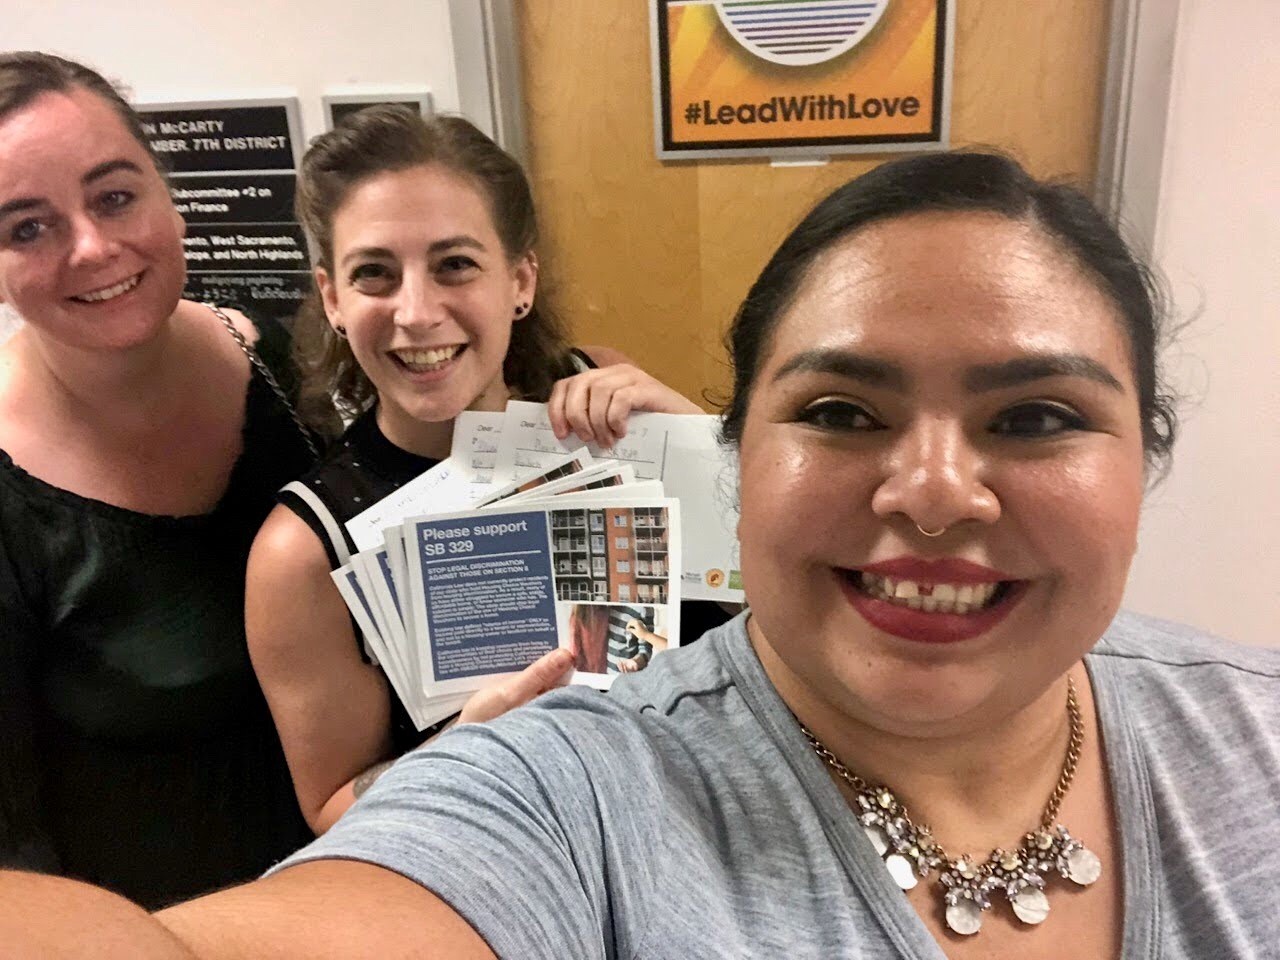 Alexandra and Rebekah from Mutual Housing California with Toru from Housing California delivering postcards to Sacramento representatives on August 27, 2019